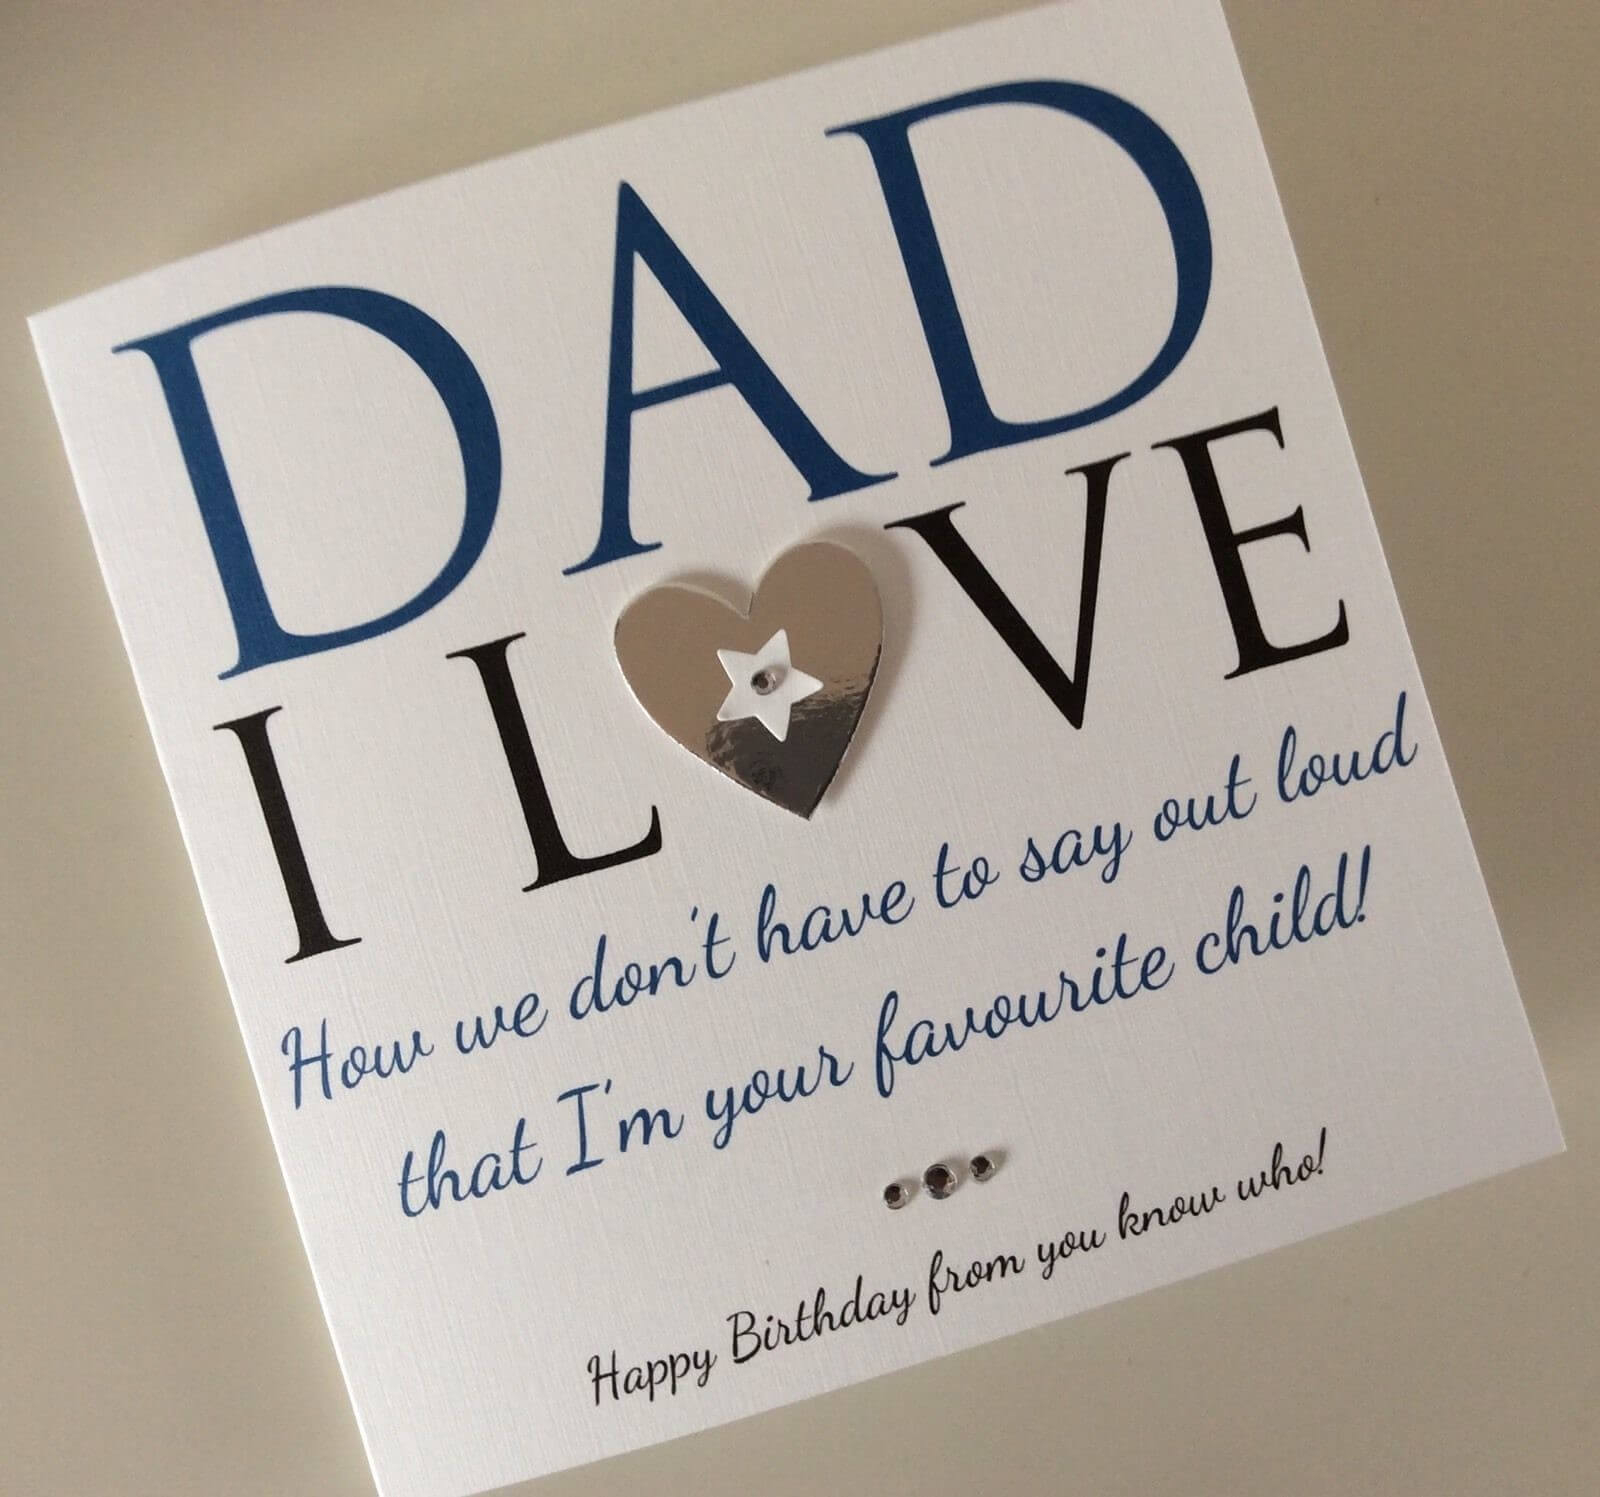 Birthday Cards For Dad Ideas Birthday Card Ideas For Dad Examples And Forms